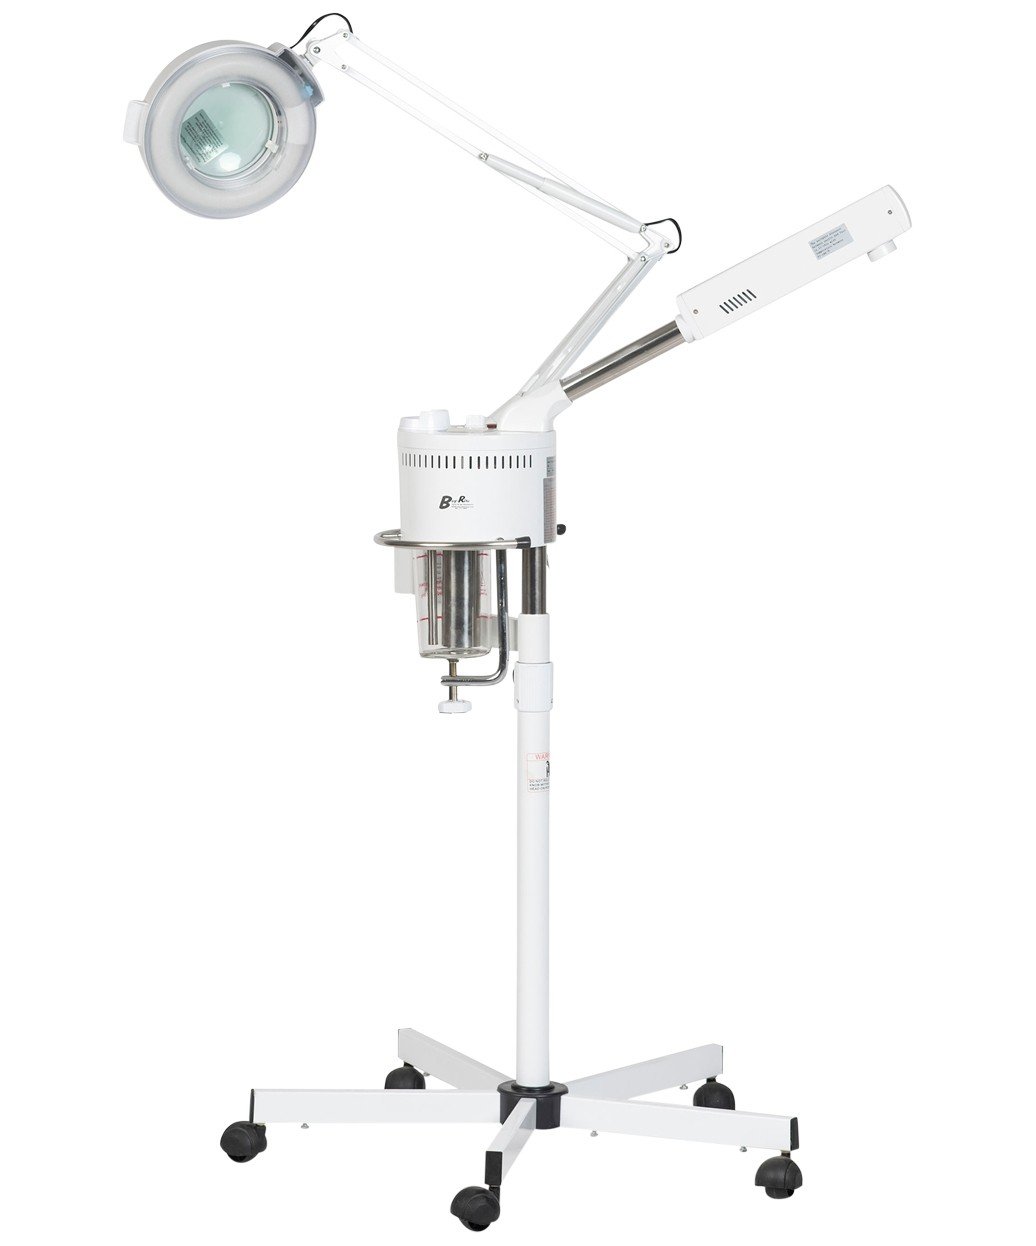 Platinum Facial Spa Package 2 in 1 Ozone Facial Steamer & Mag Lamp Combo